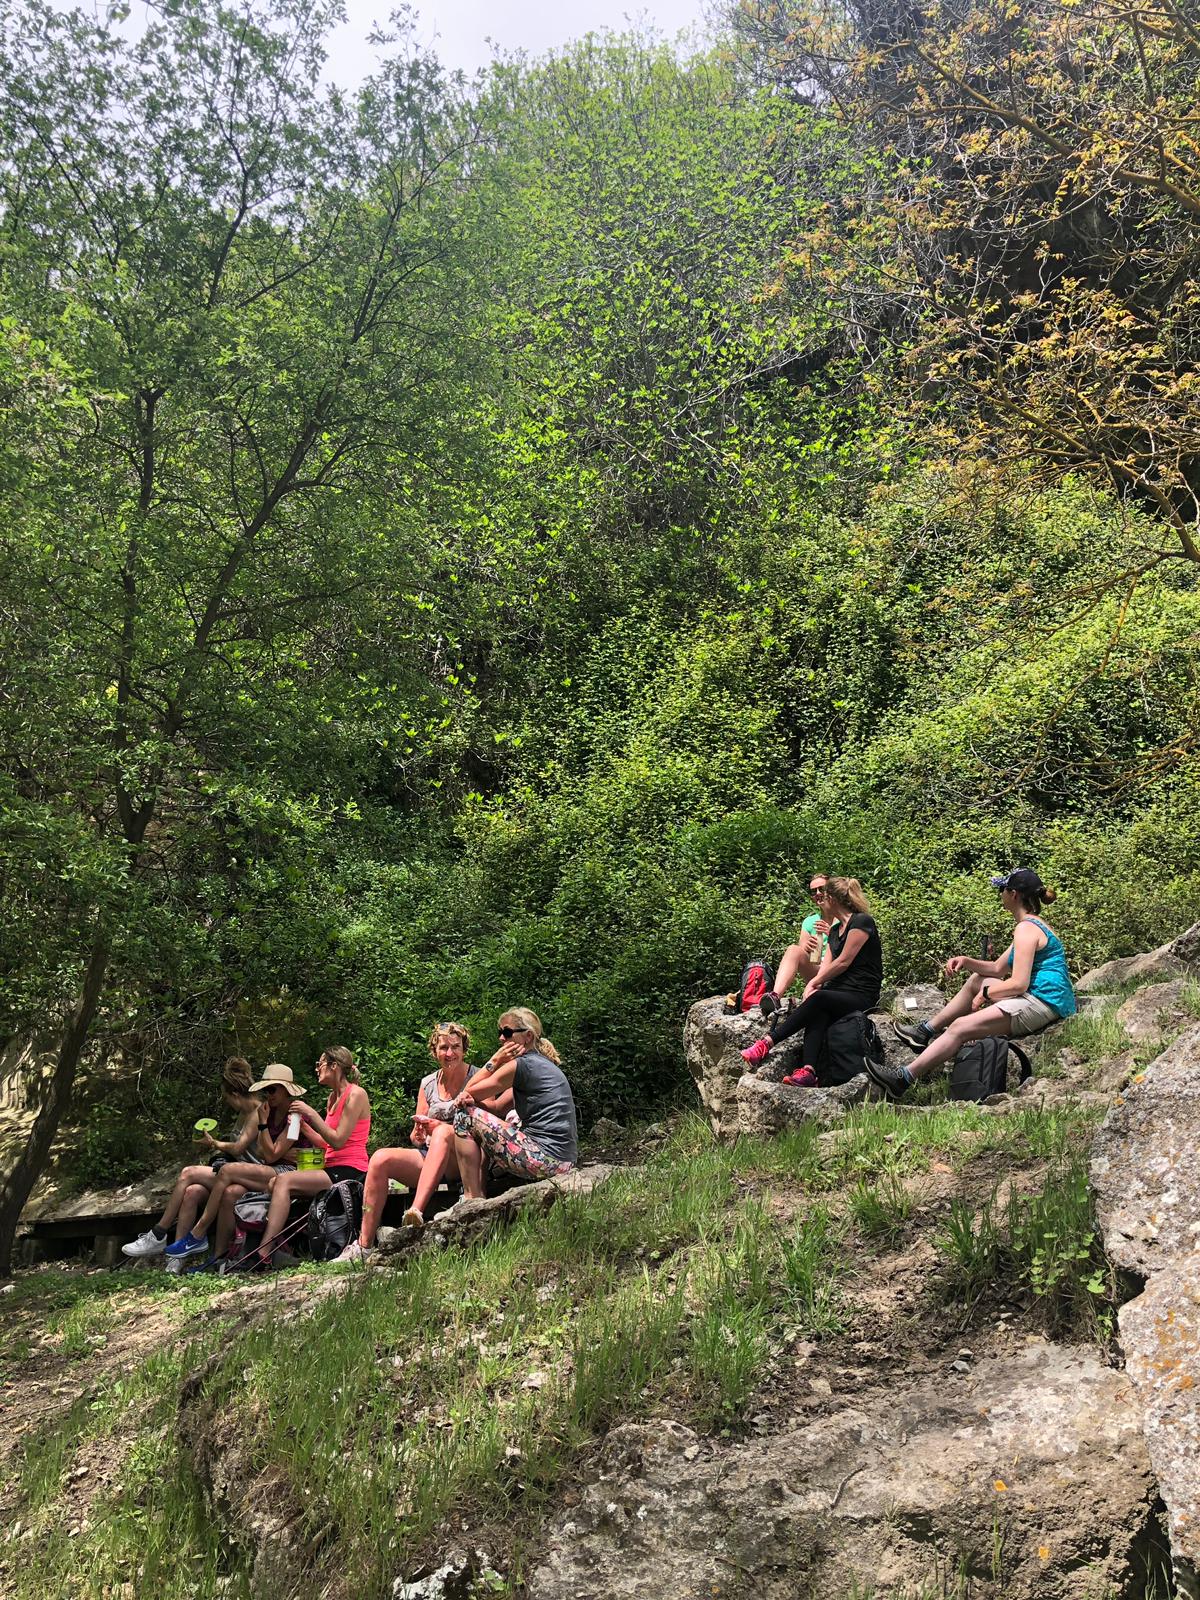 Lunch during hike at Yin Yang Yoga retreat in the Malaga mountains in Spain with Jane Bakx Yoga